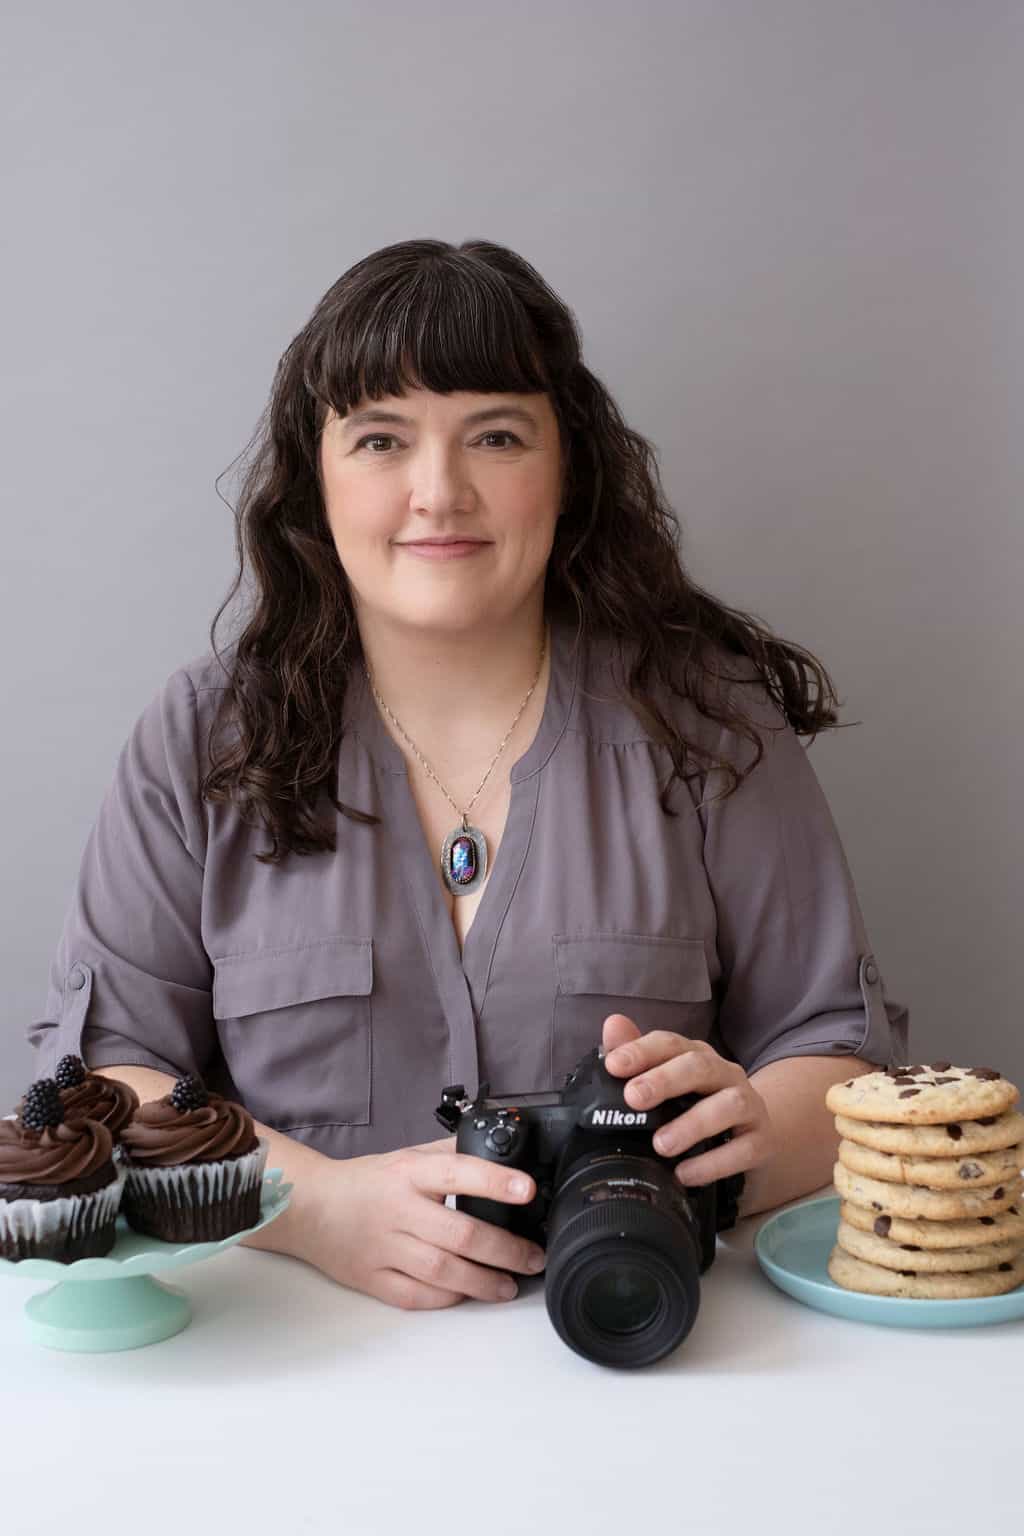 Photo of Tiffany Welsh holding a camera with plates of desserts.